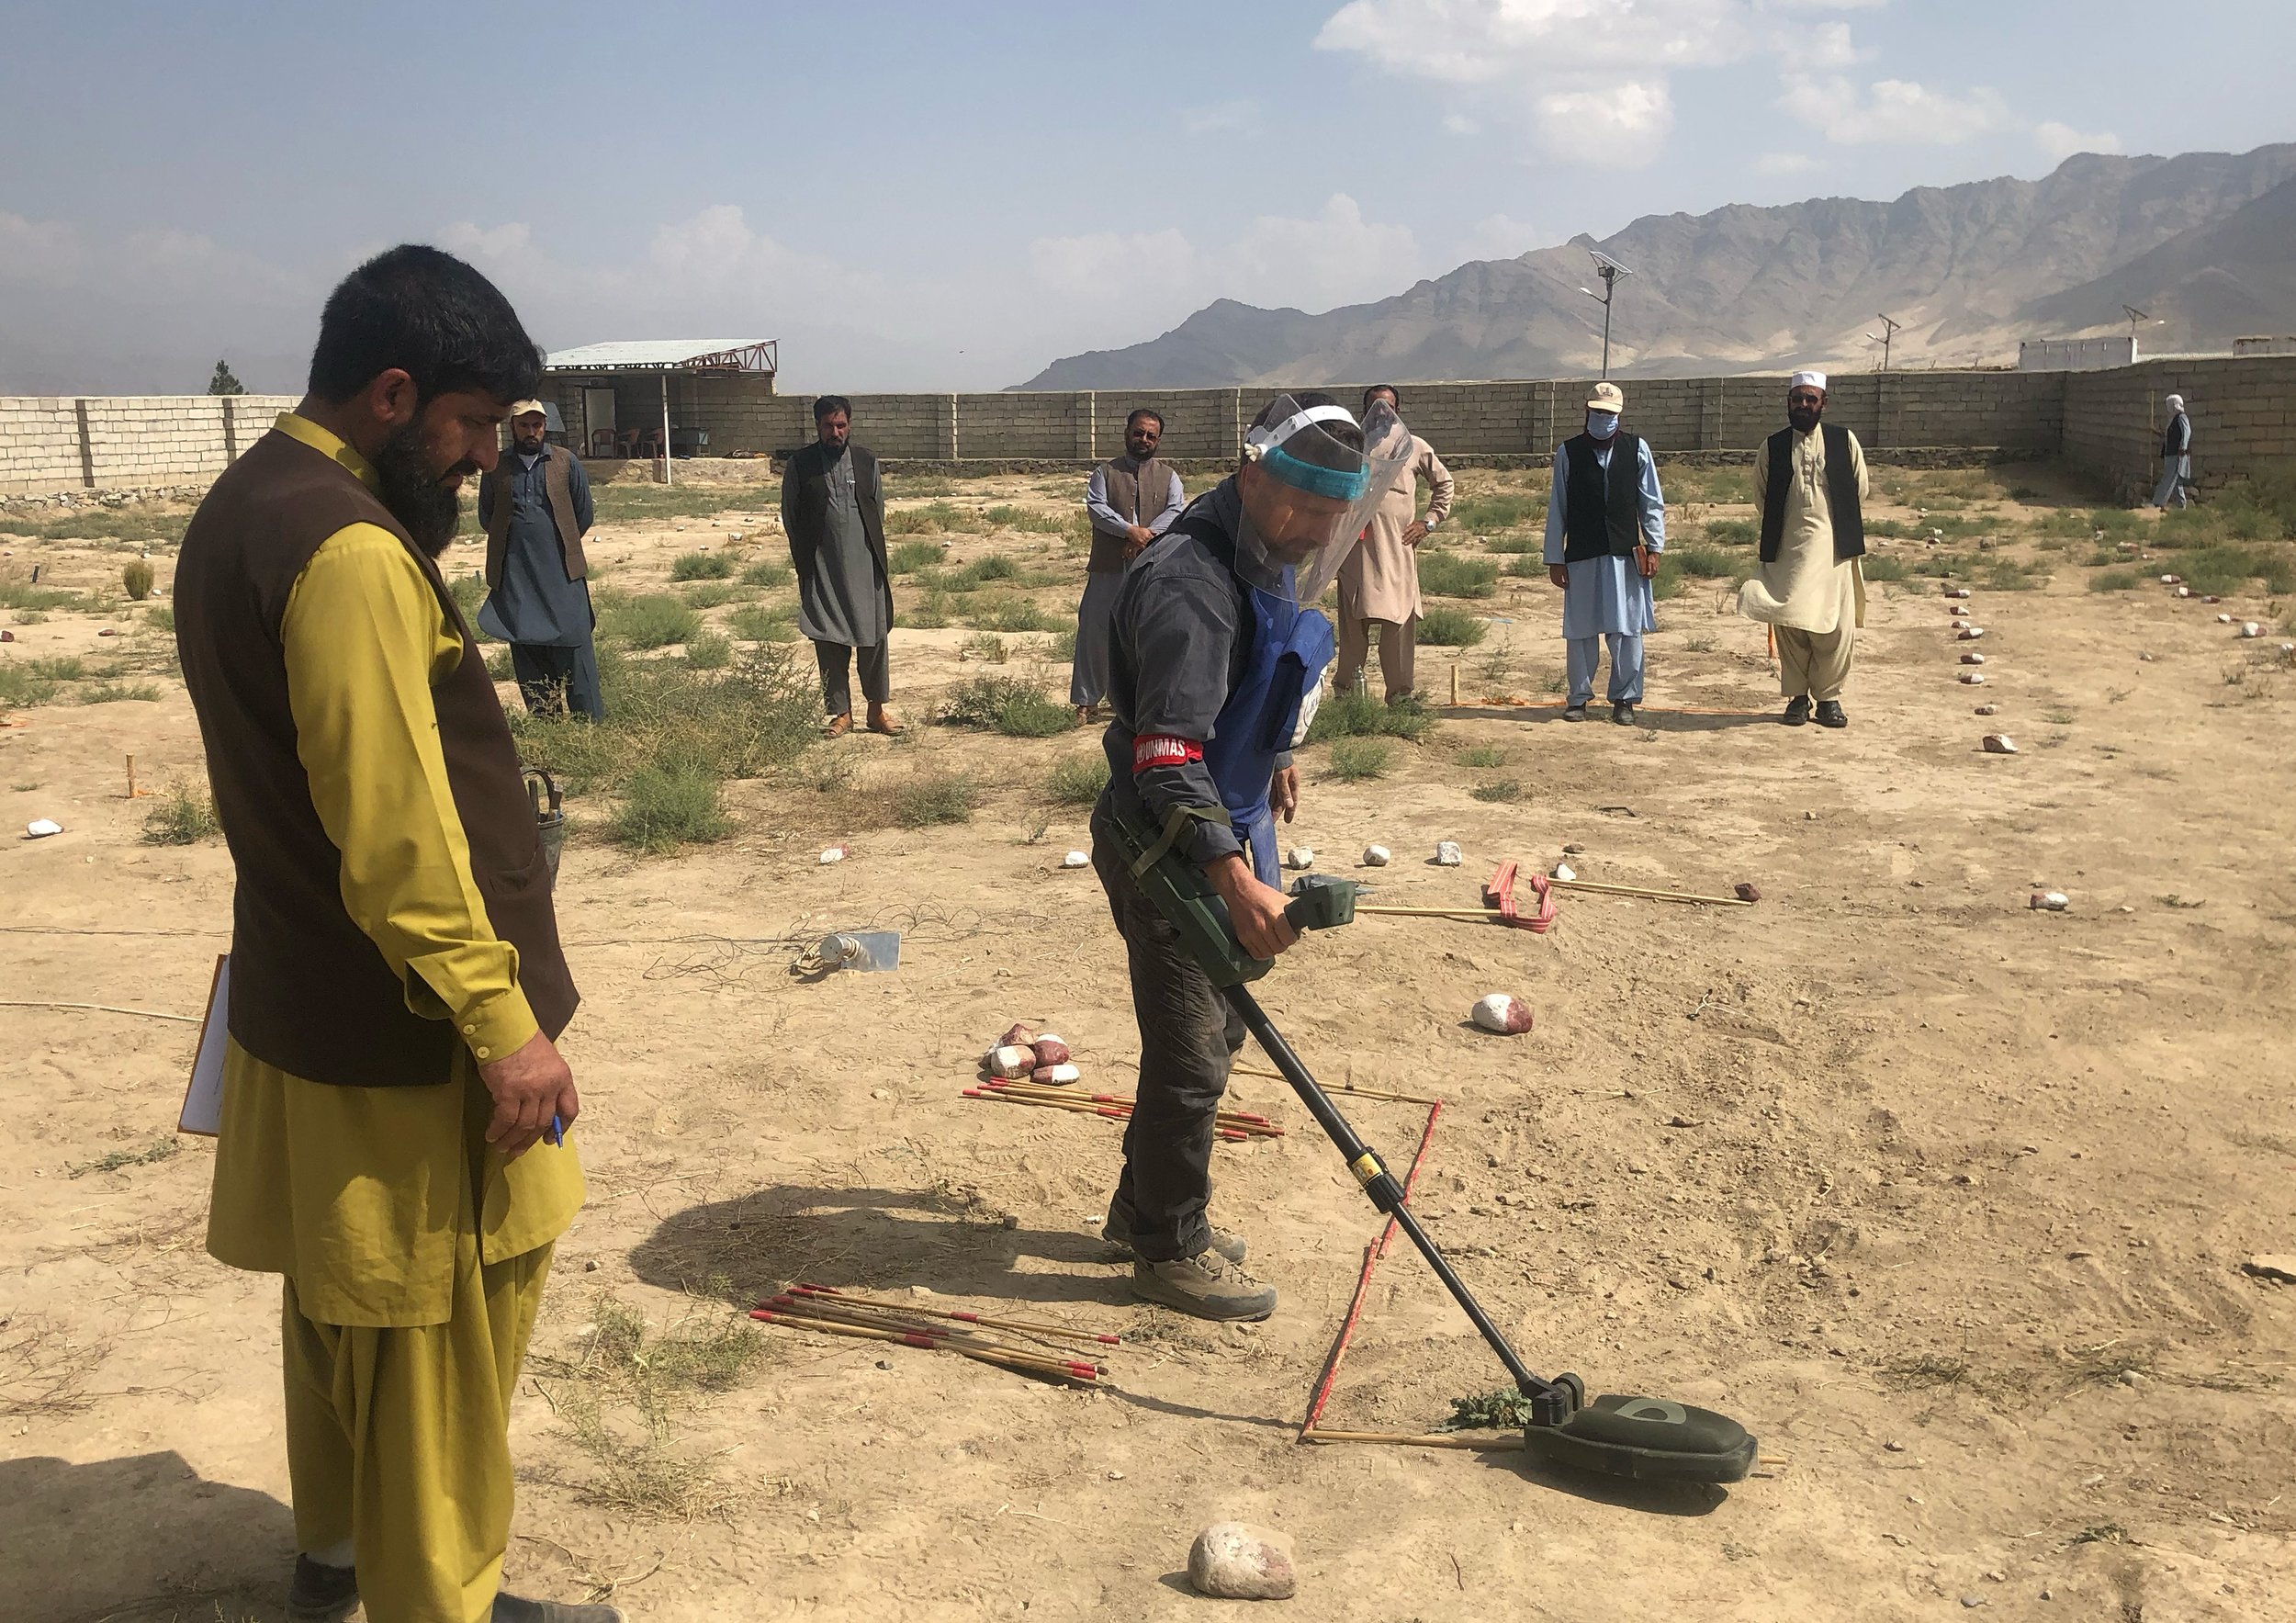  A group of trainees, with a supervisor overseeing, conduct a practical mine detection exercise, showcasing a collaborative training environment essential for effective UXO risk mitigation. 